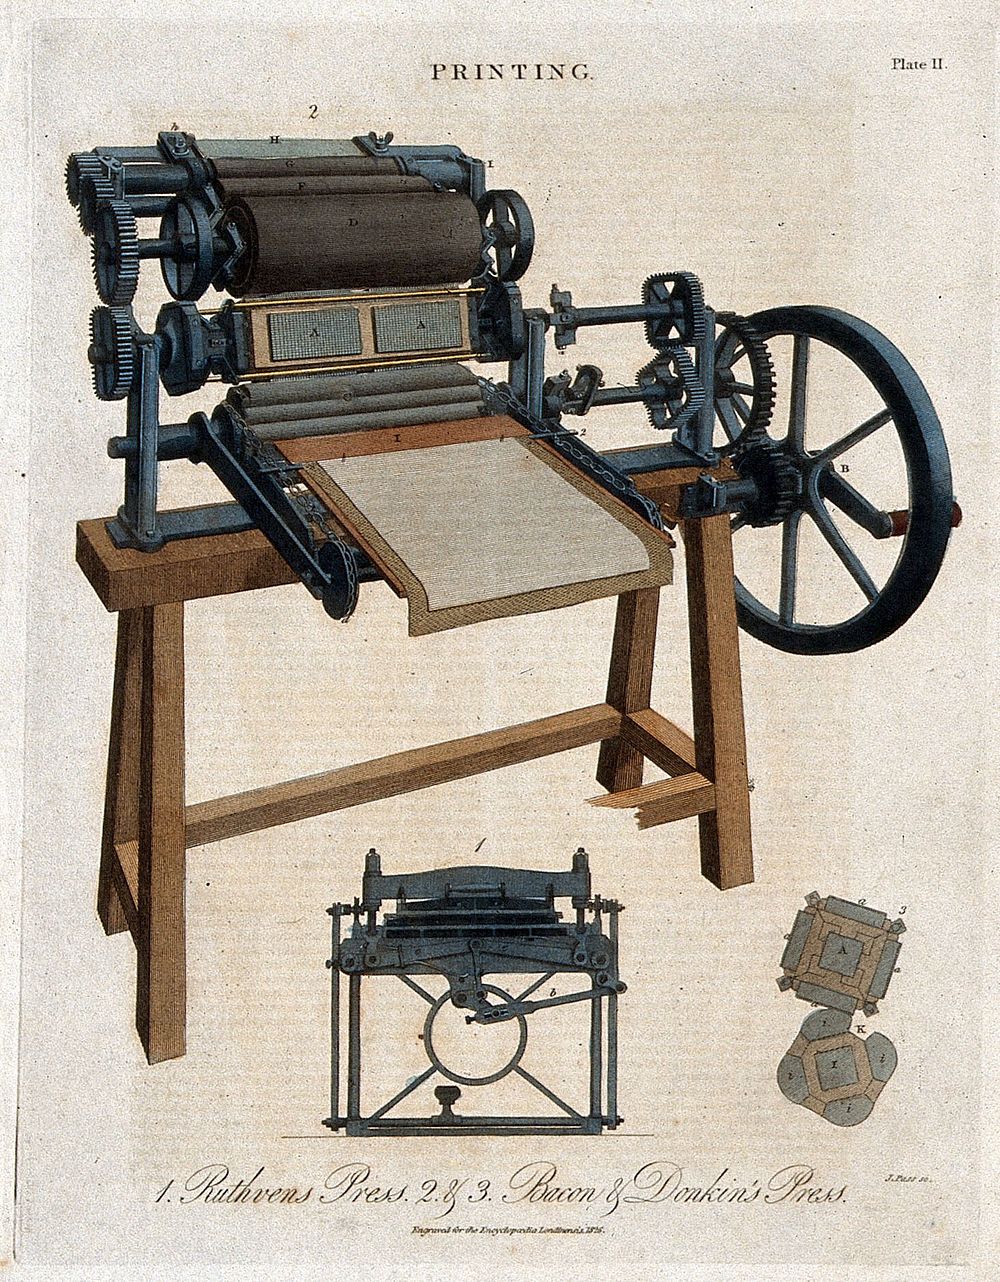 Printing: a three-quarter view of a Bacon & Donkins press, with a detail of the eccentric gearing. Coloured engraving by W.…